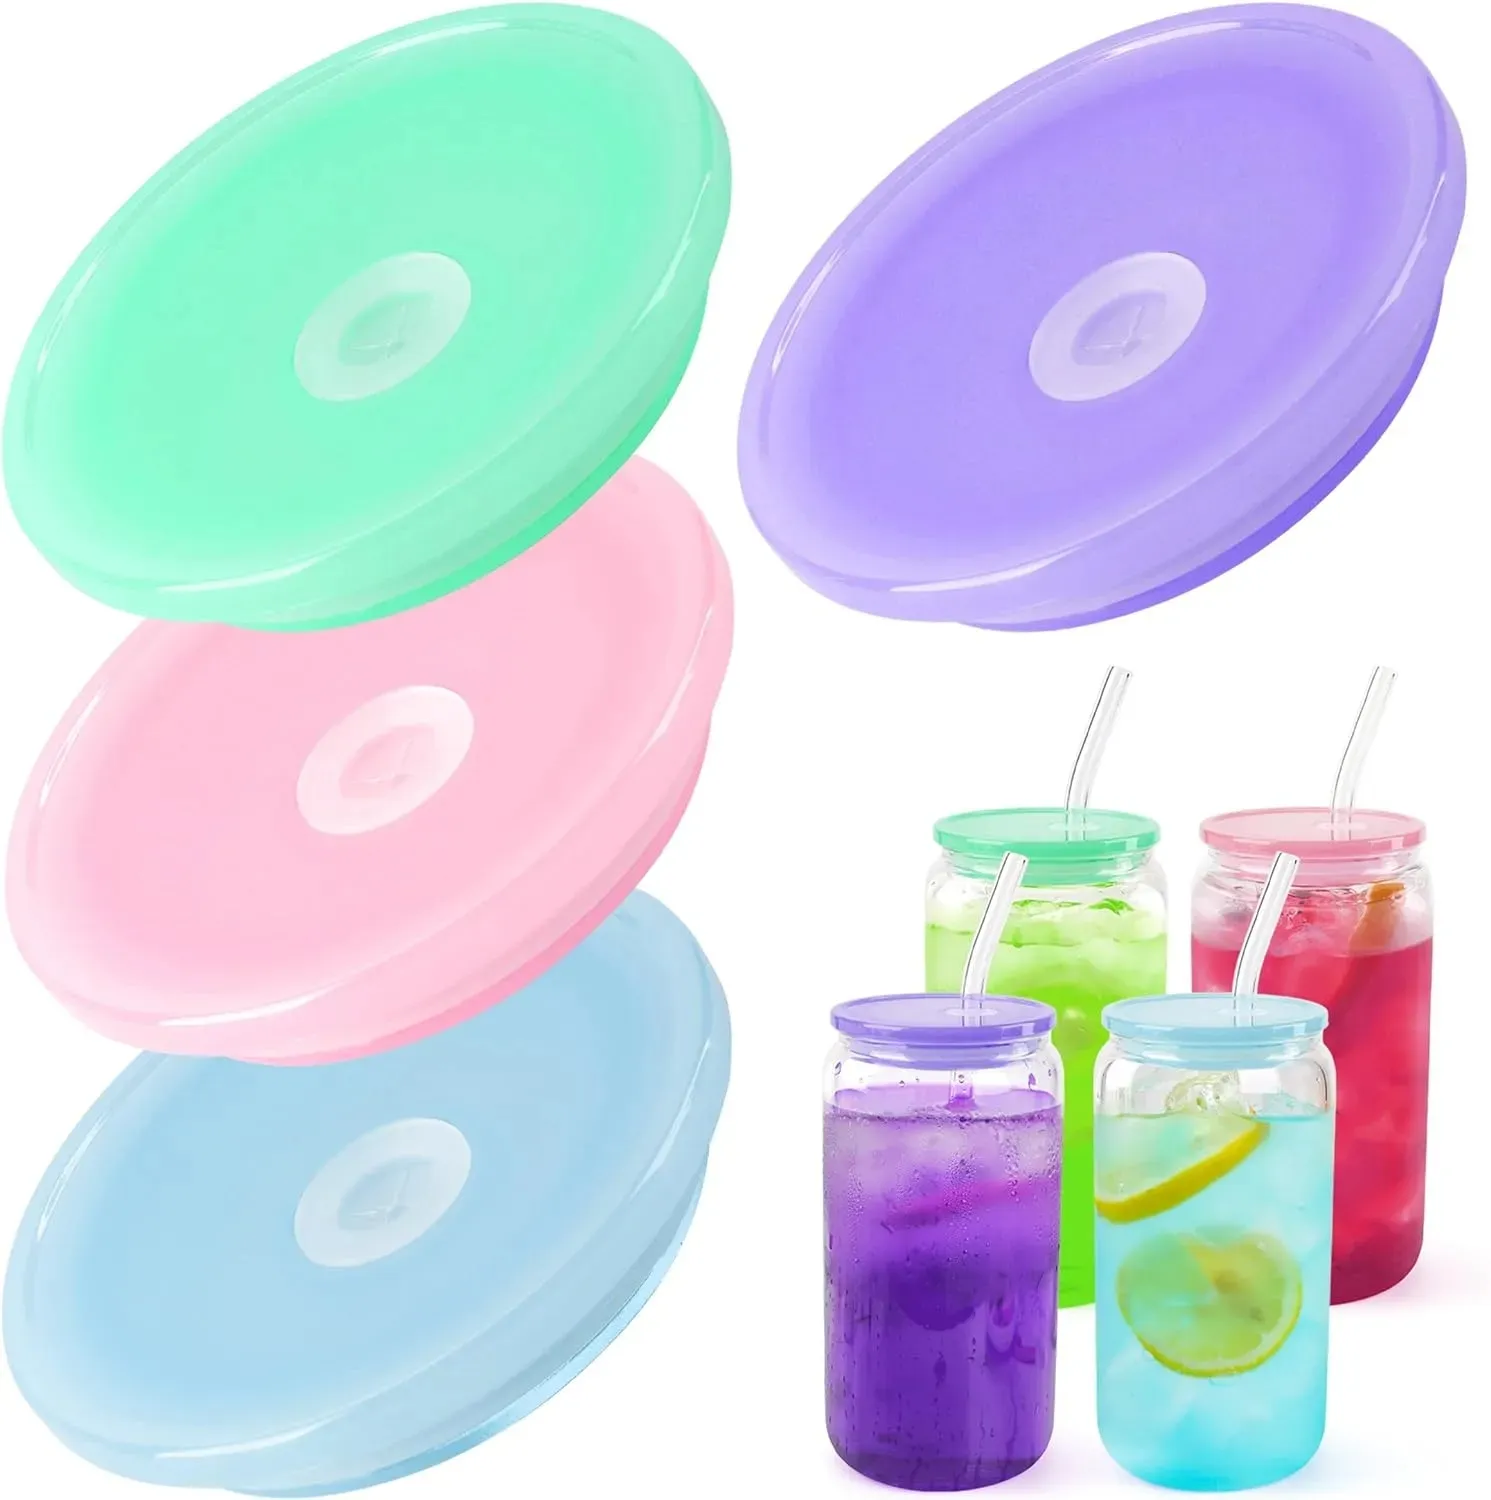 Replaceds Colored Plastic Lids for 16oz Glass Tumbler Covers Blank Clear Frosted Glass Mason Jar Libby Can Cooler Cola Beer Food Cans